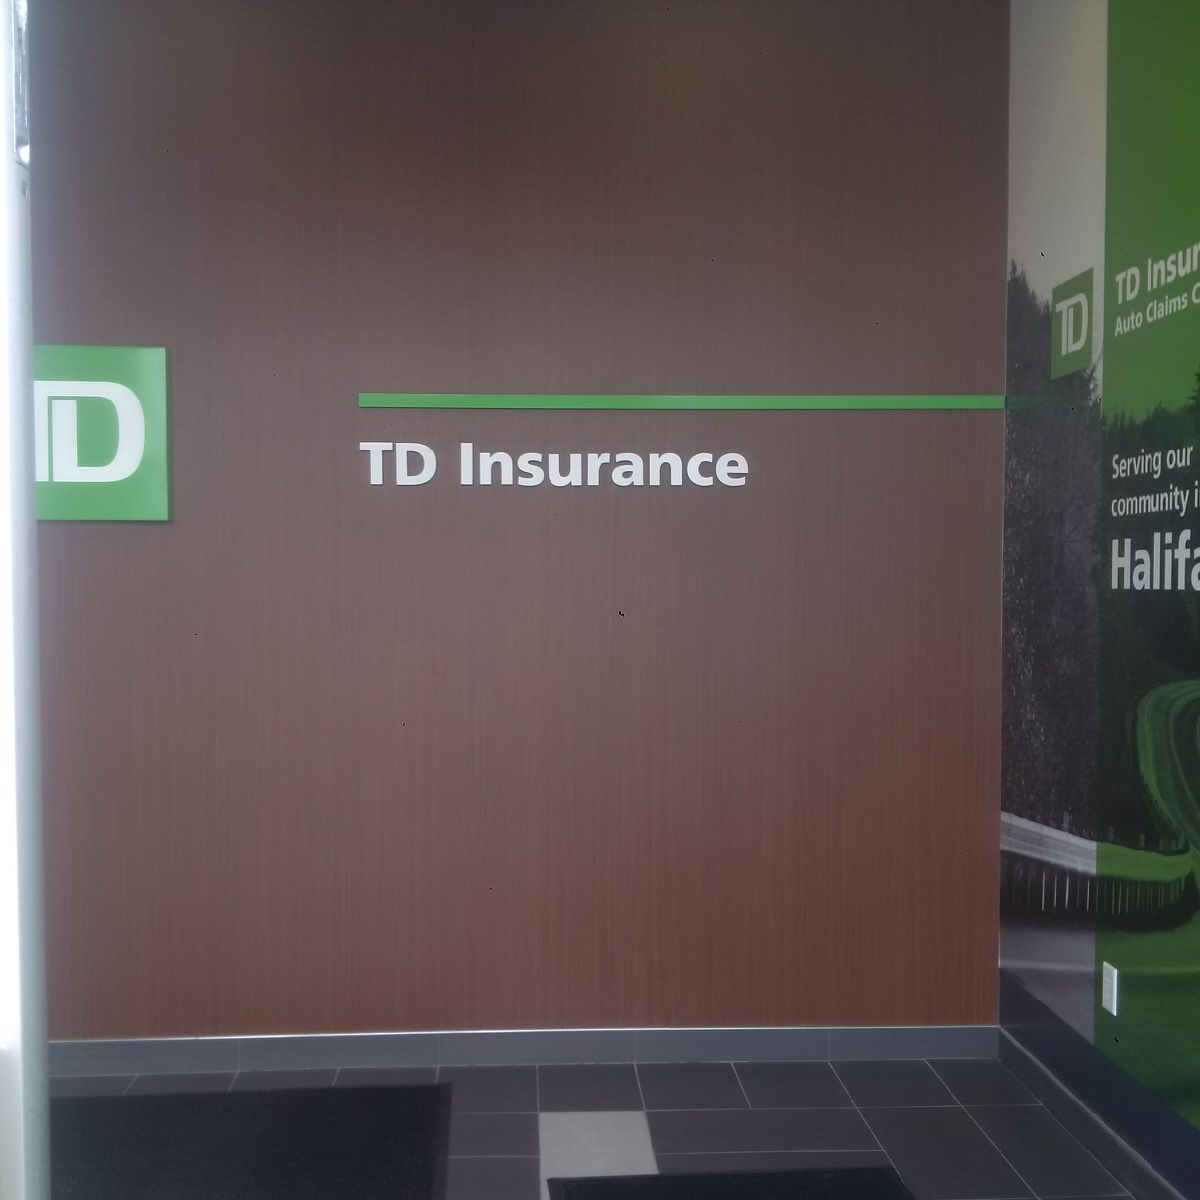 Td Auto Insurance Pei - Car Insurance Calgary: Get a Quote | TD Insurance / With td insurance, find advice you can count on, coverage tailored to your needs, and ways you can save.